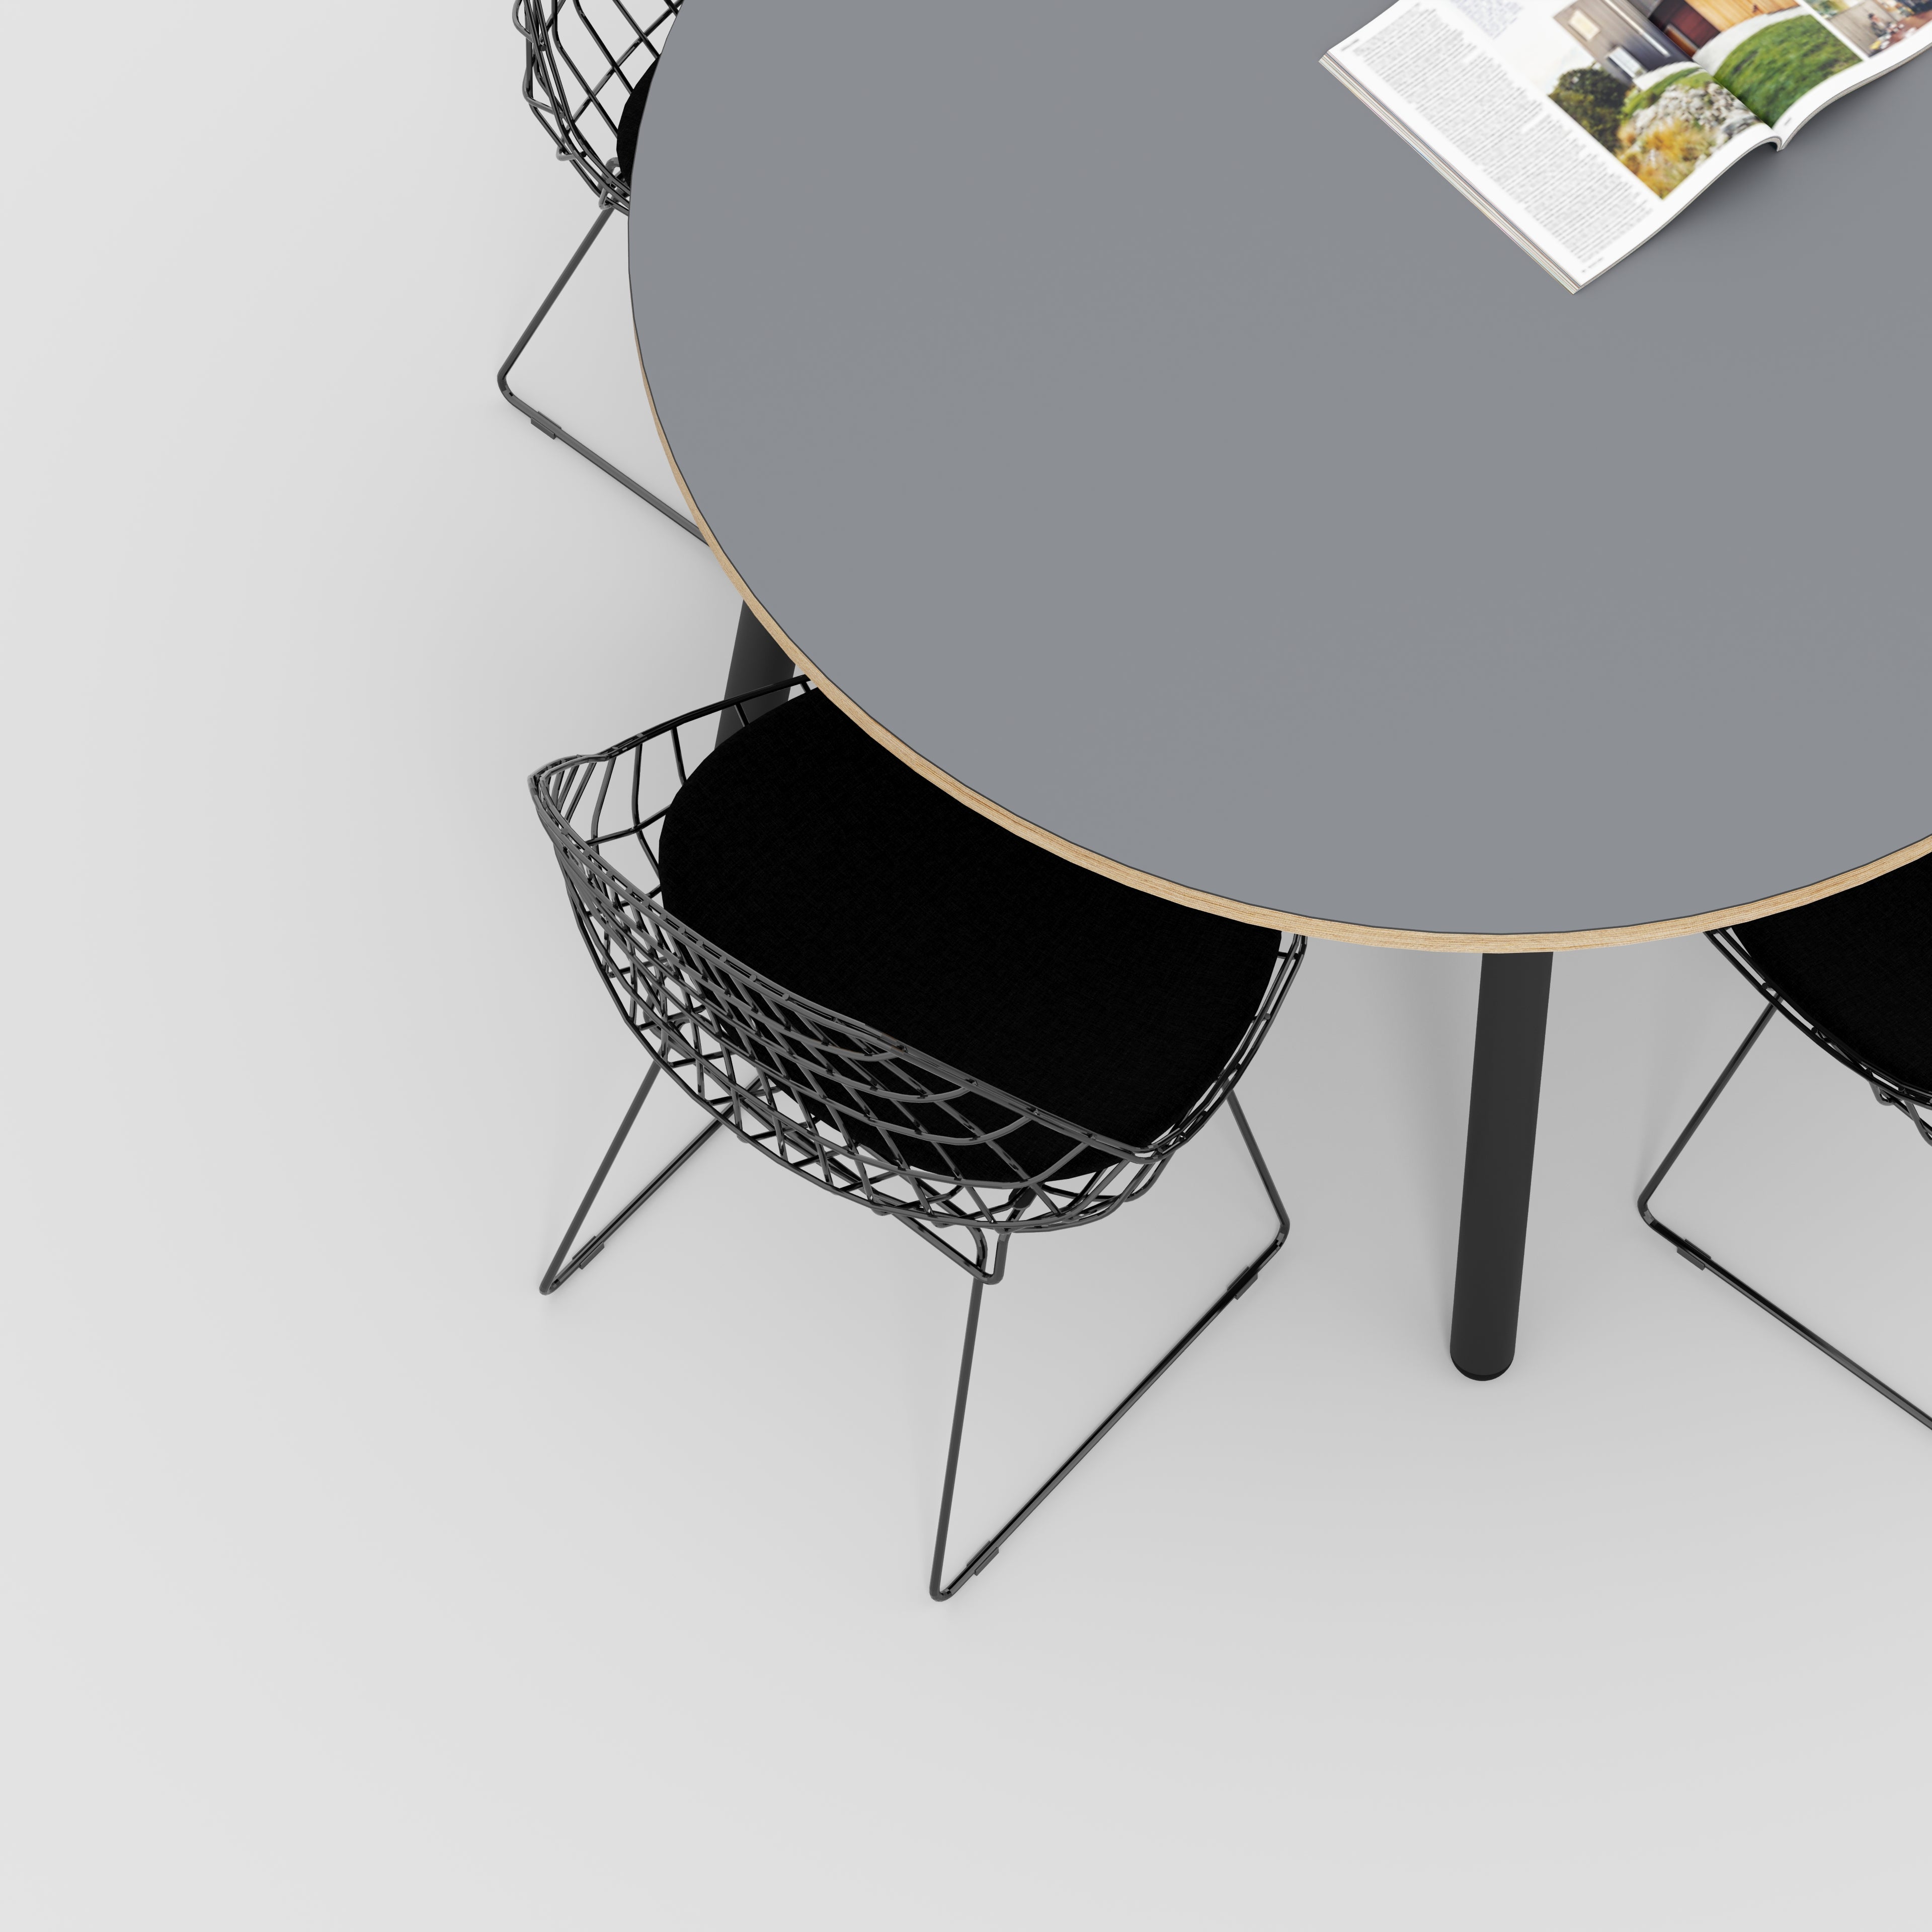 Round Table with Black Round Single Pin Legs - Formica Tornado Grey - 1200(dia) x 735(h)